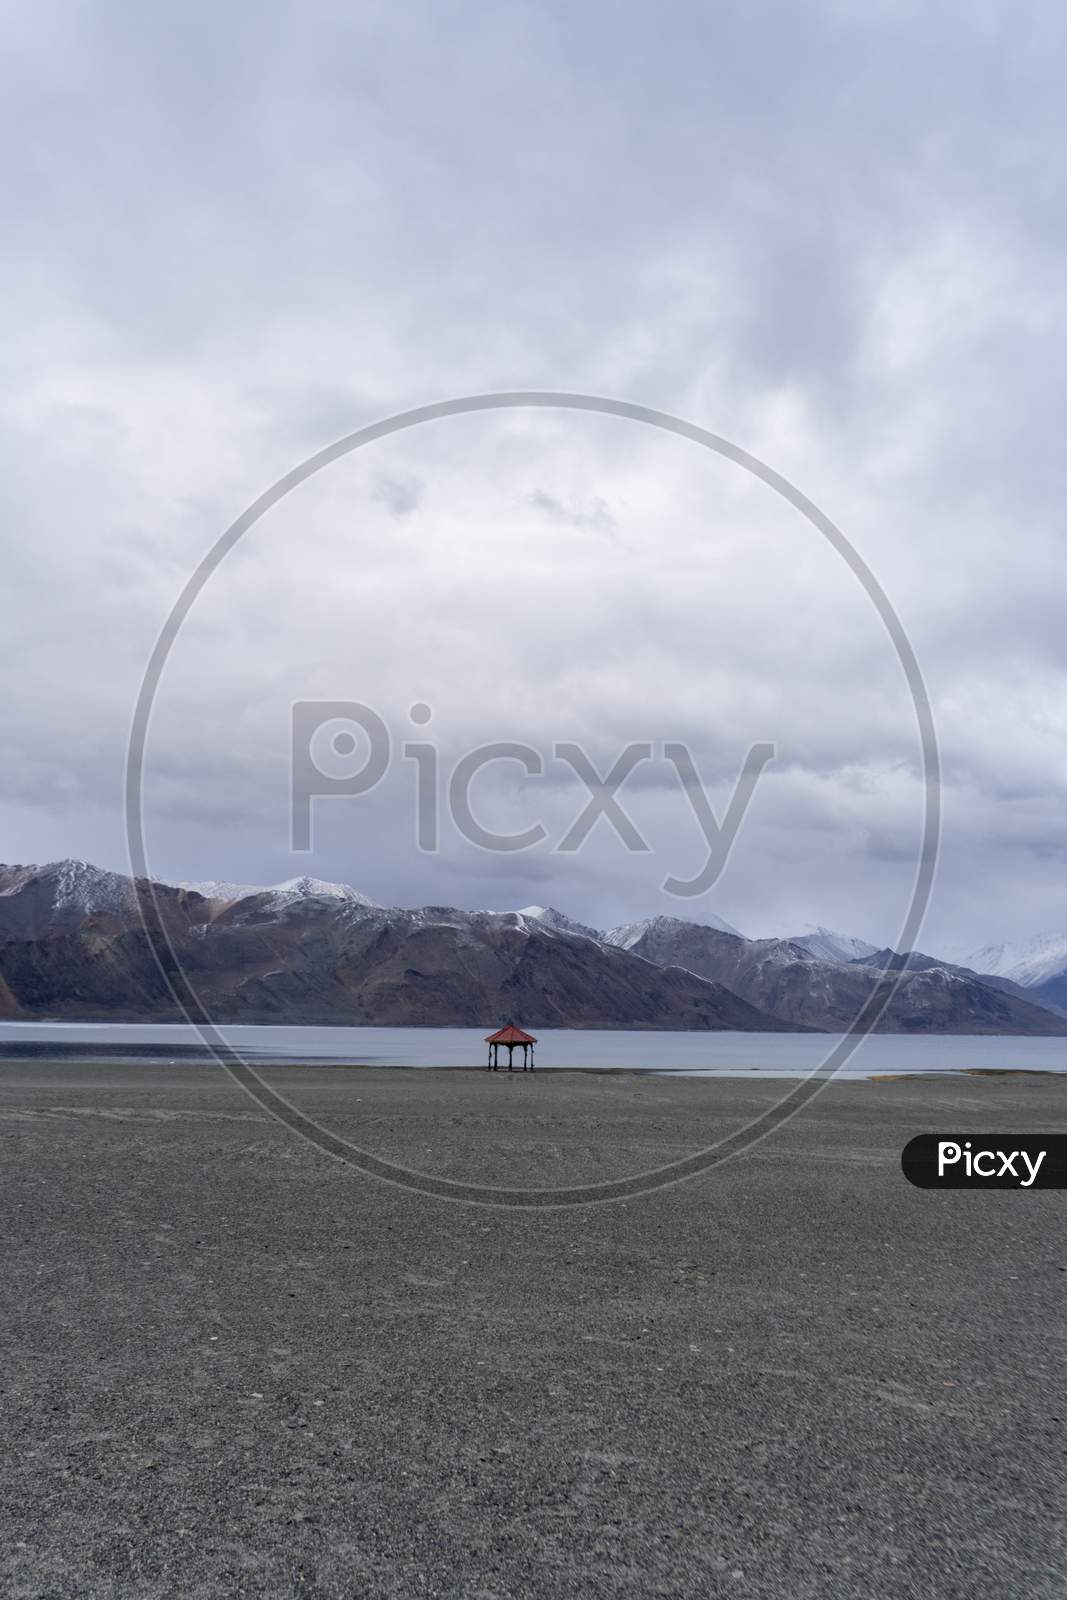 Pangong Tso, Tibetan For "High Grassland Lake", Also Referred To As Pangong Lake, Is An Endorheic Lake In The Himalayas Situated At A Height Of About 4,350 M. At Leh Ladakh, Jammu And Kashmir, India.